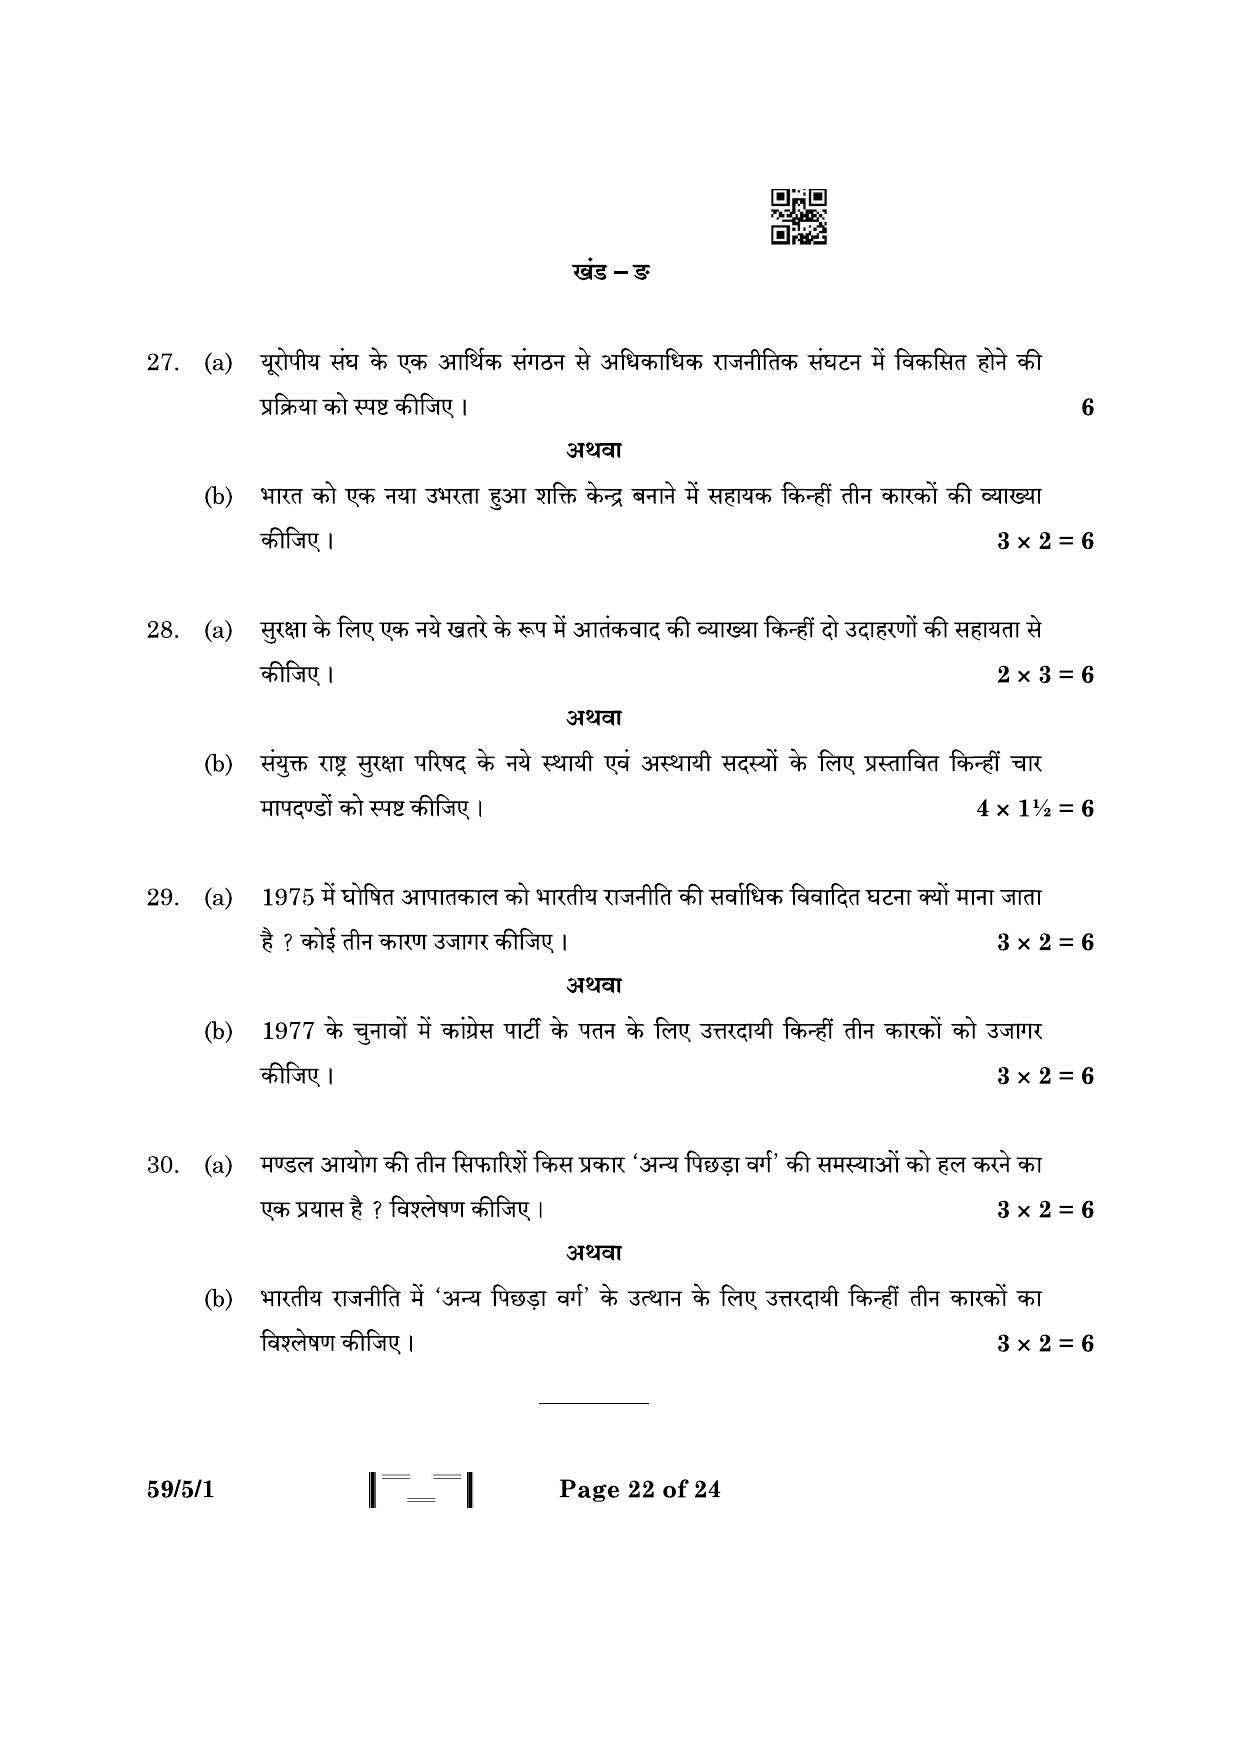 CBSE Class 12 59-5-1 Political Science 2023 Question Paper - Page 22